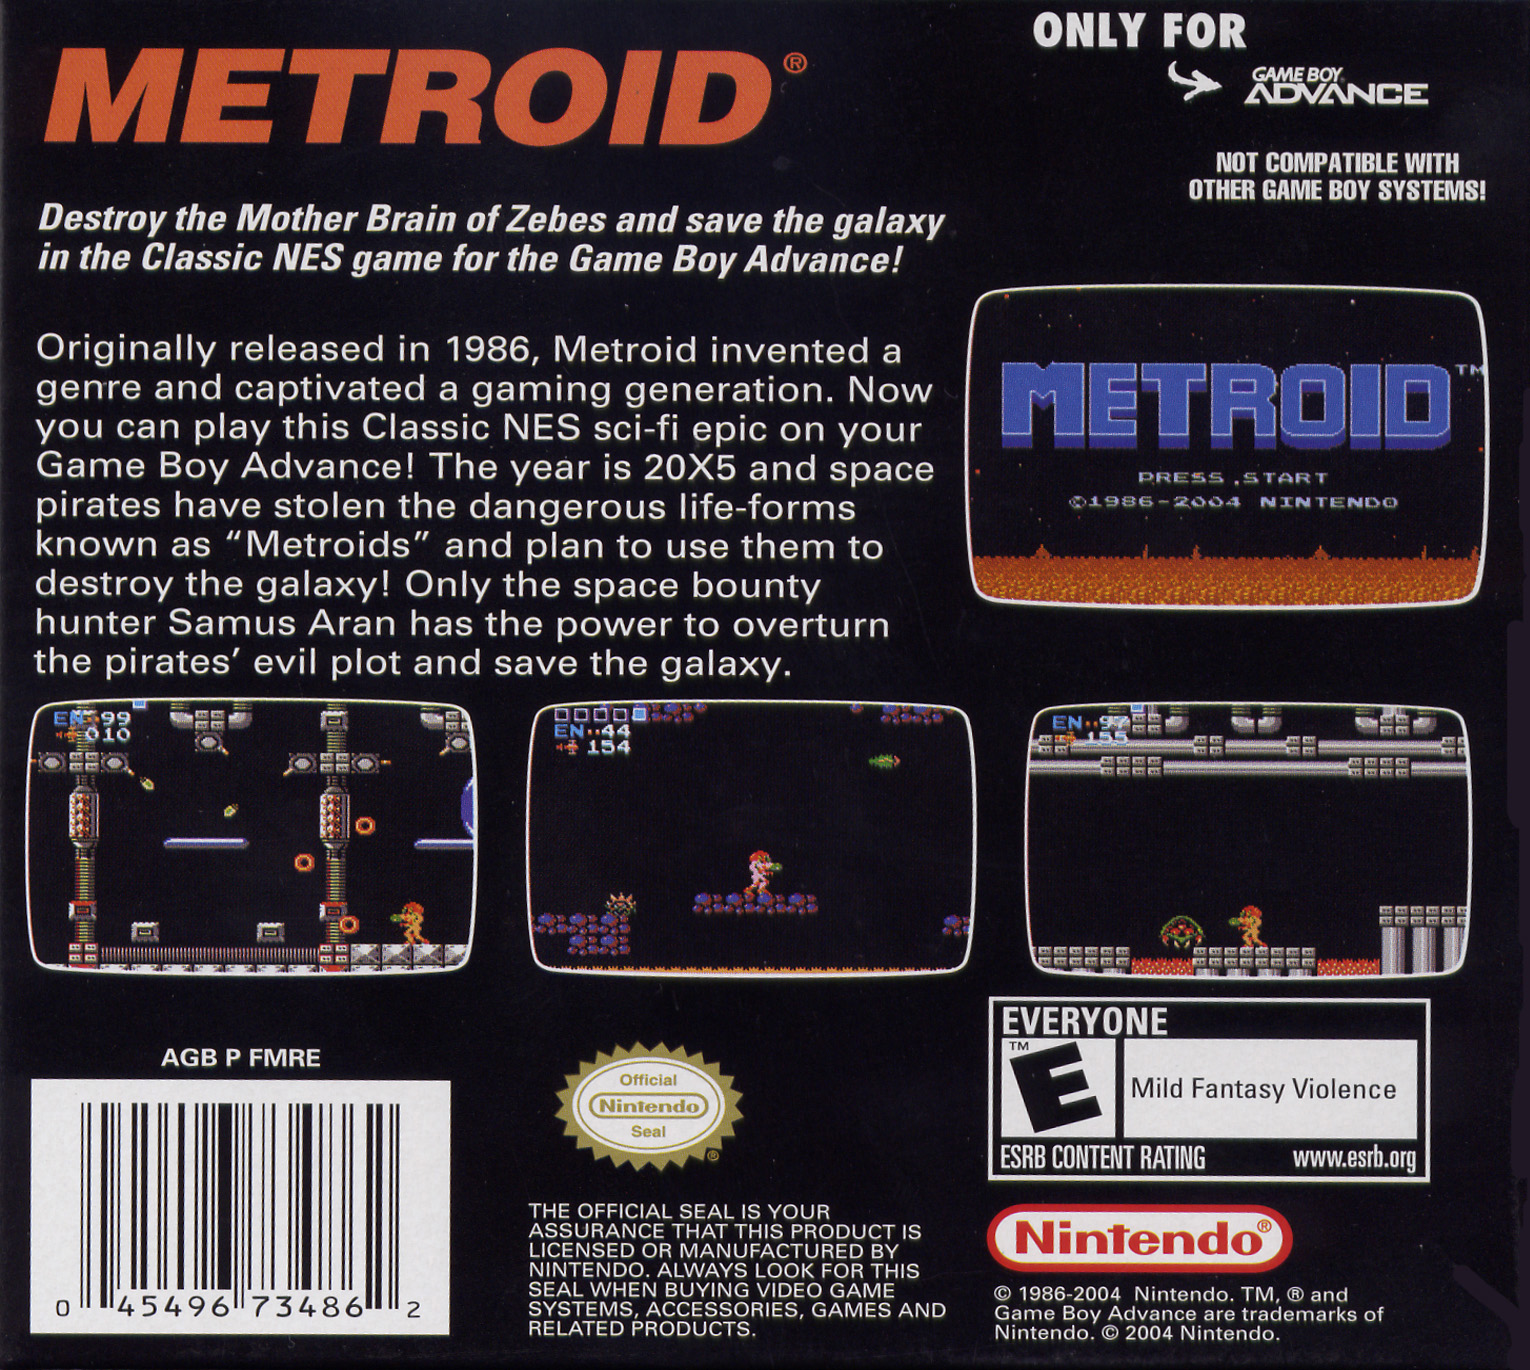 View, Download, Rate, and Comment on this Classic NES Series: Metroid Video...